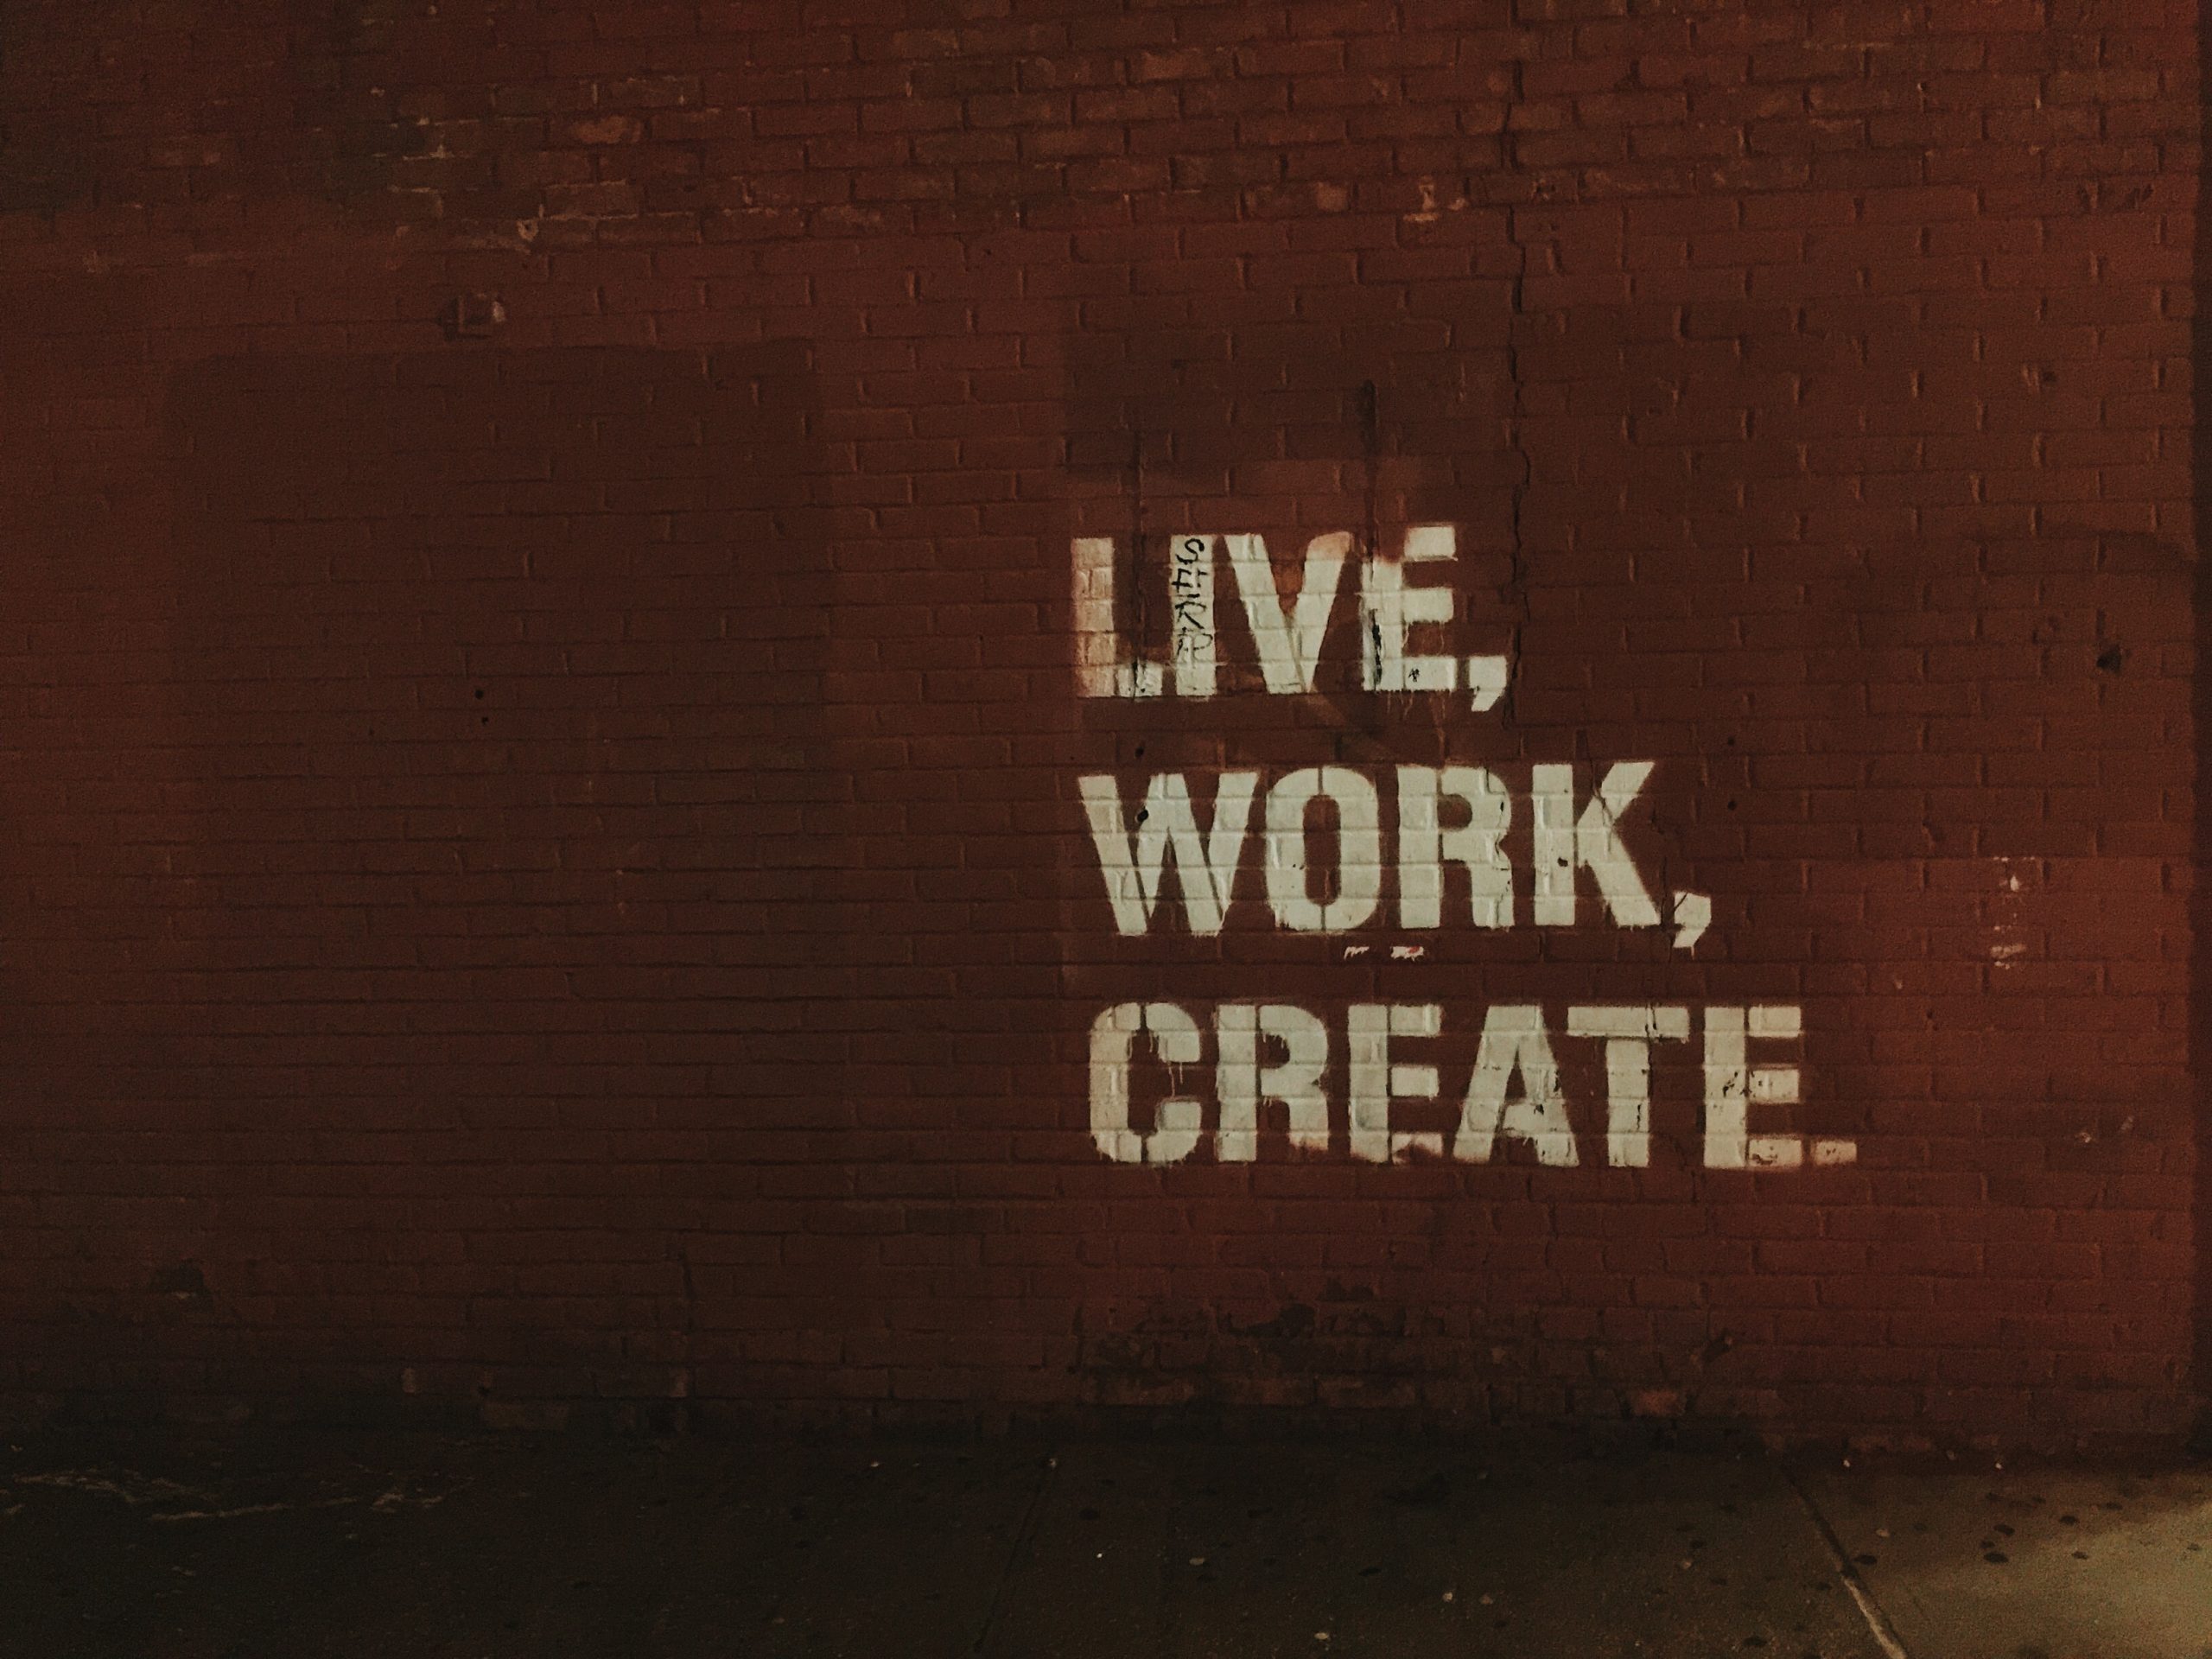 Tag sur mur rouge : Live work create